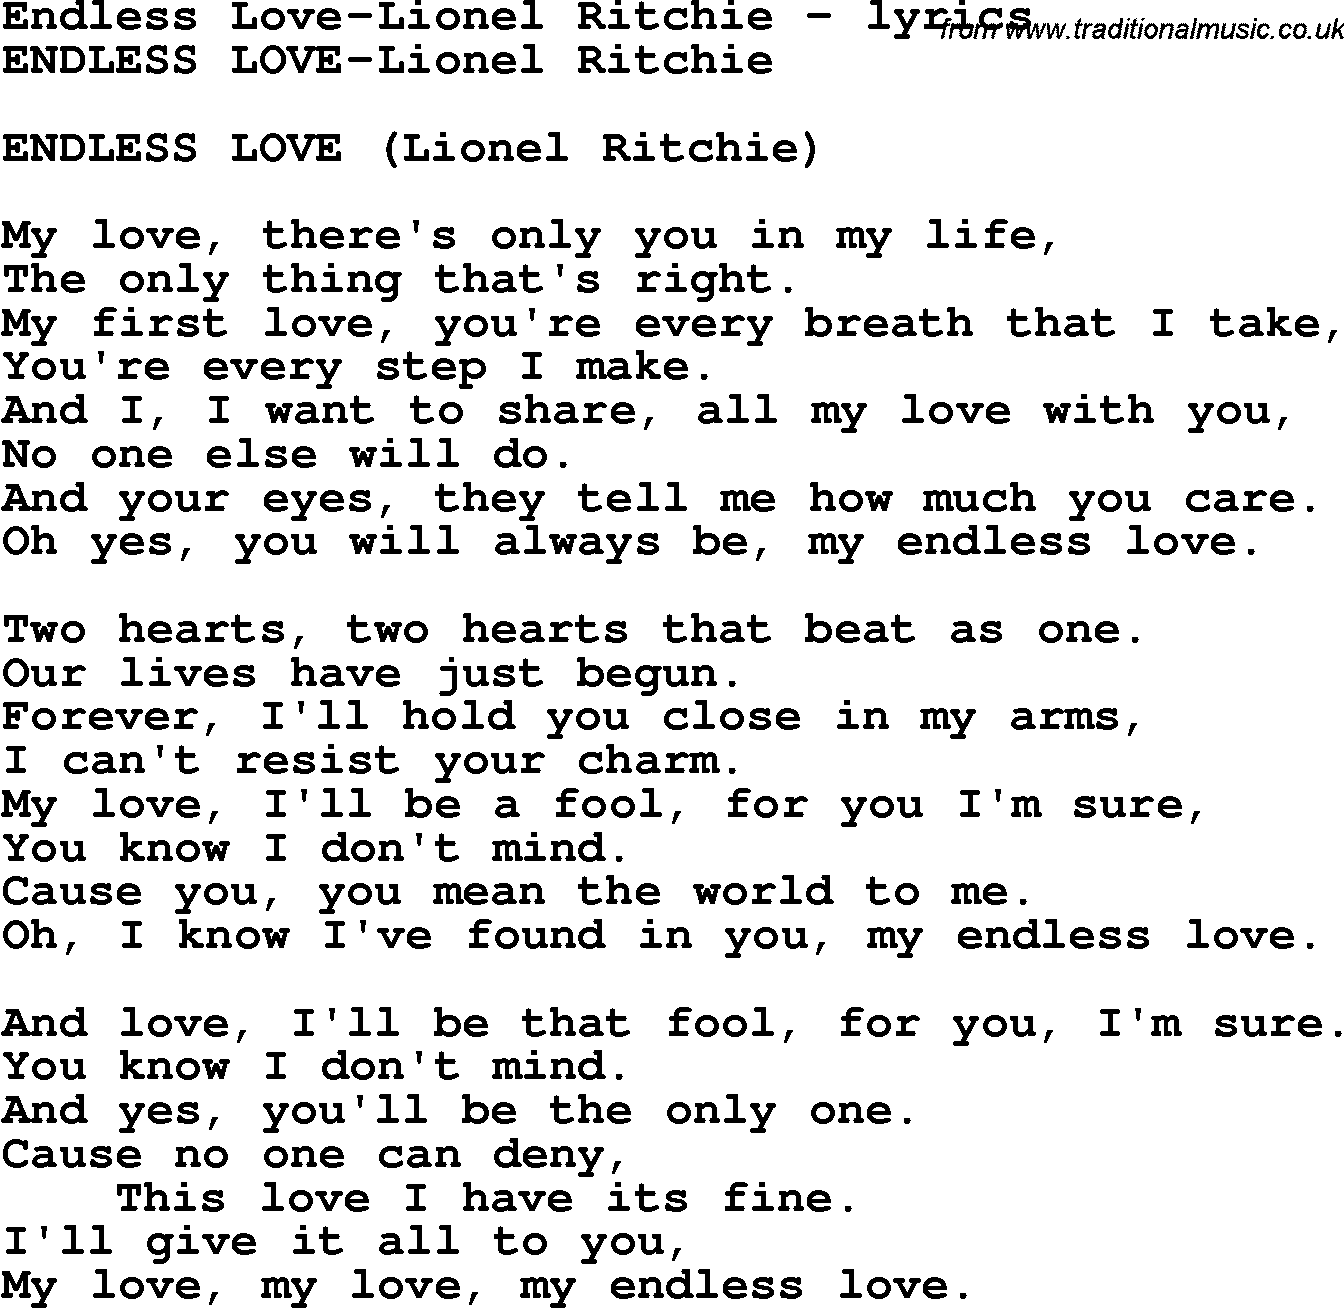 Love Song Lyrics for: Endless Love-Lionel Ritchie